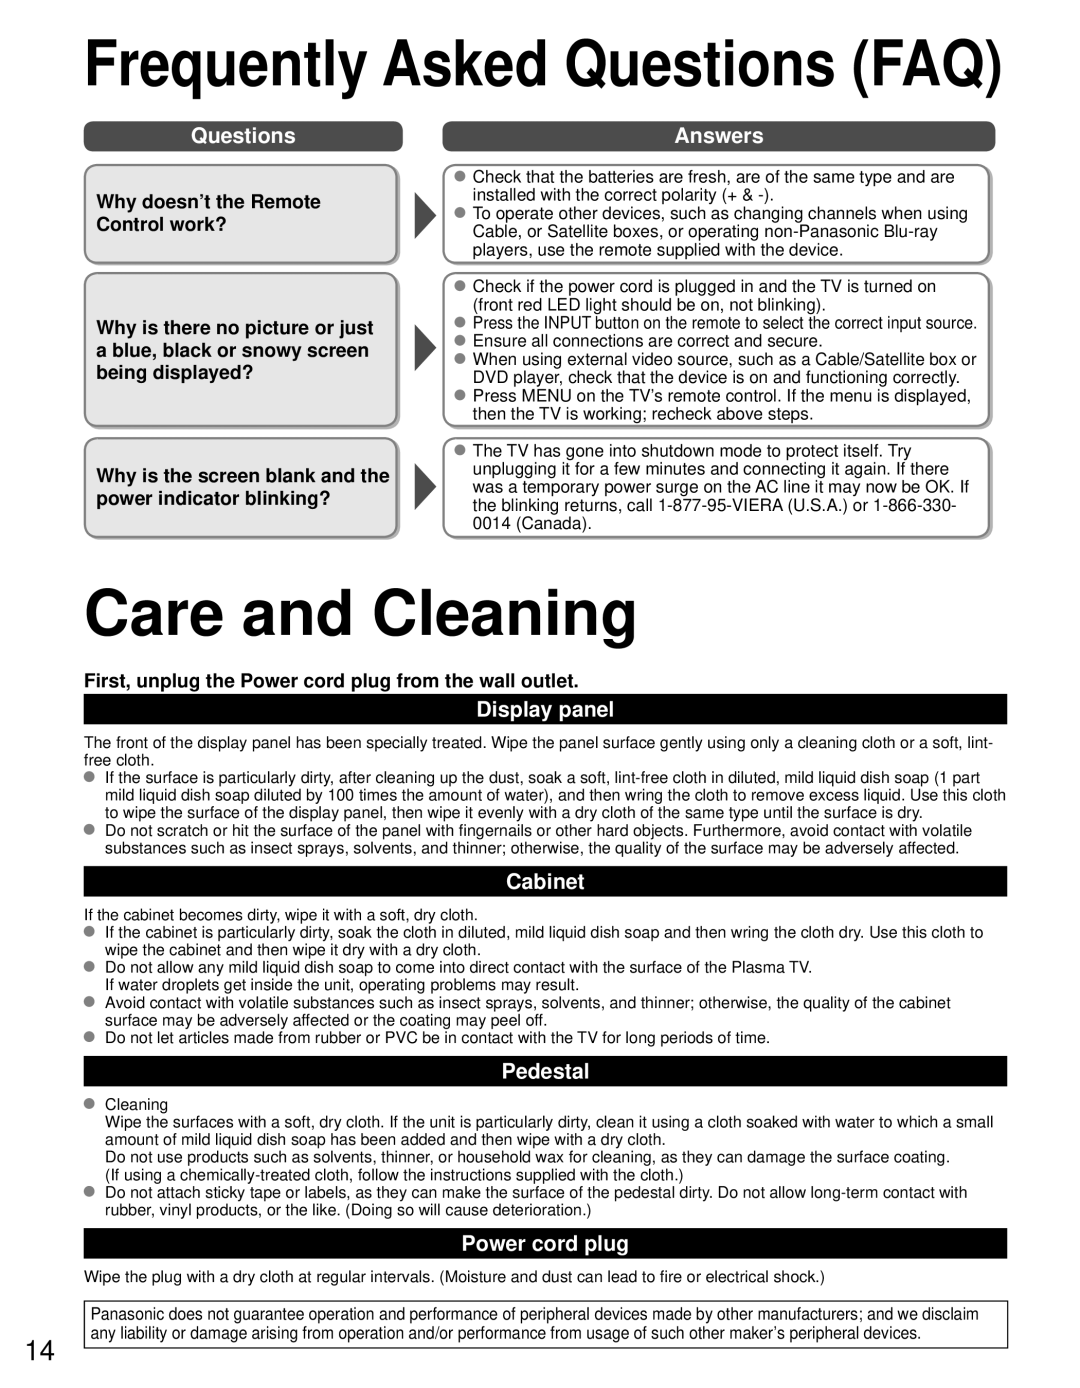 Panasonic TC-P60U50 Care and Cleaning, Frequently Asked Questions FAQ, Answers, Display panel, Cabinet, Pedestal 